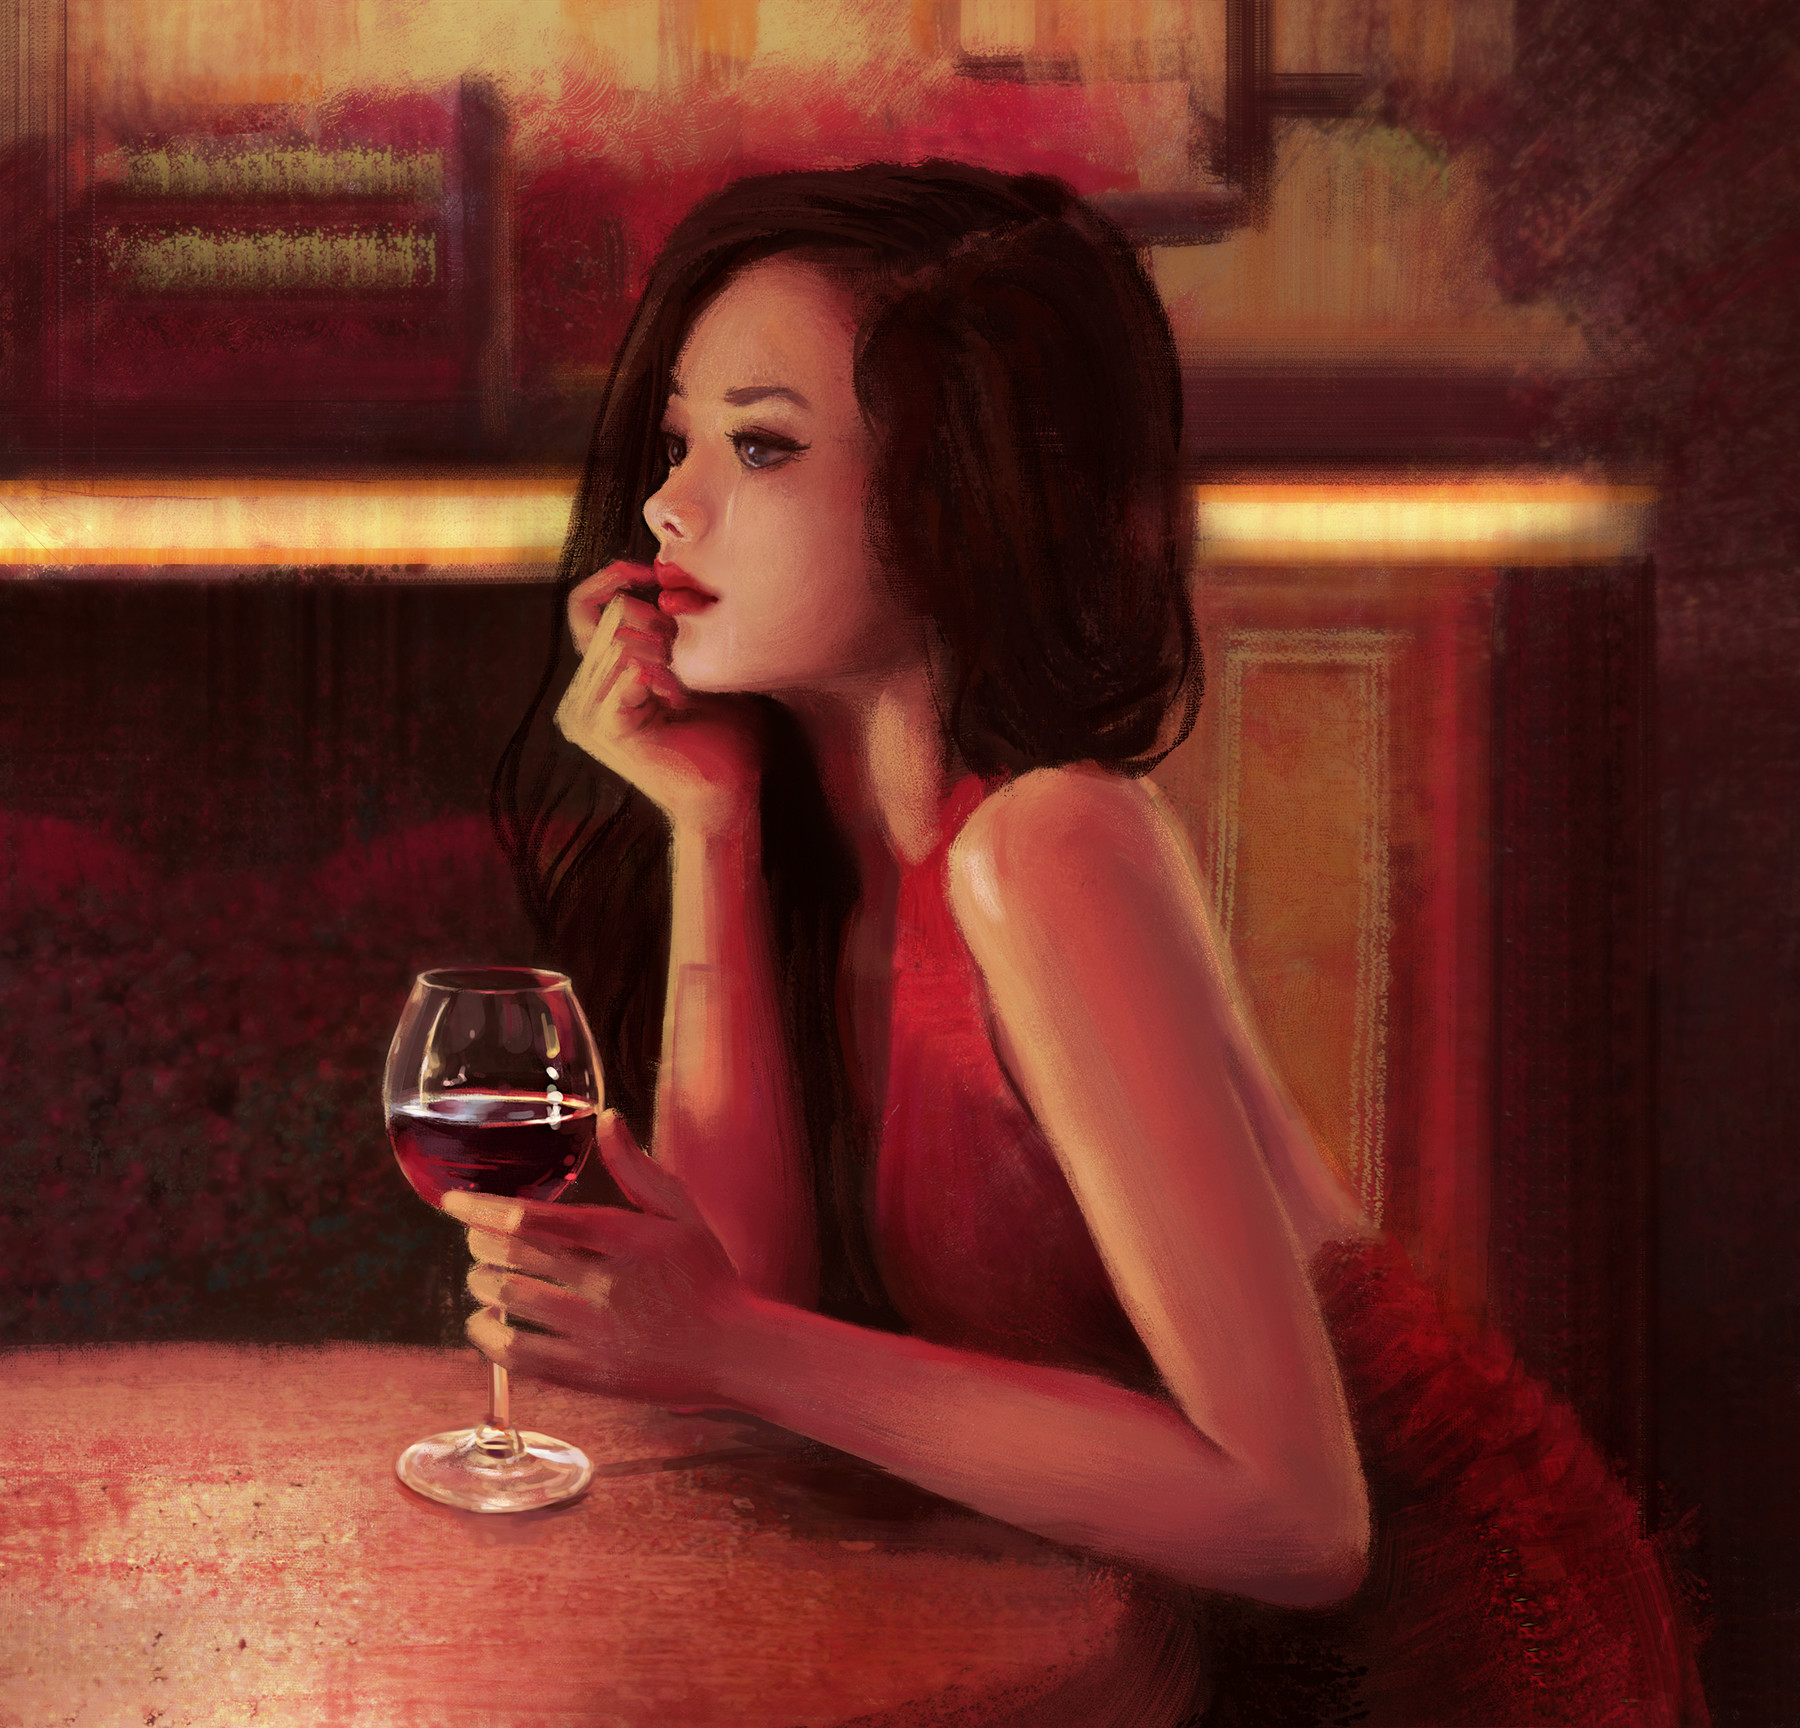 Mandy Jurgens Red Wine Wine Glass Young Woman Wine Crying Fan Art Red Clothing Red Dress Dark Hair D 1800x1728